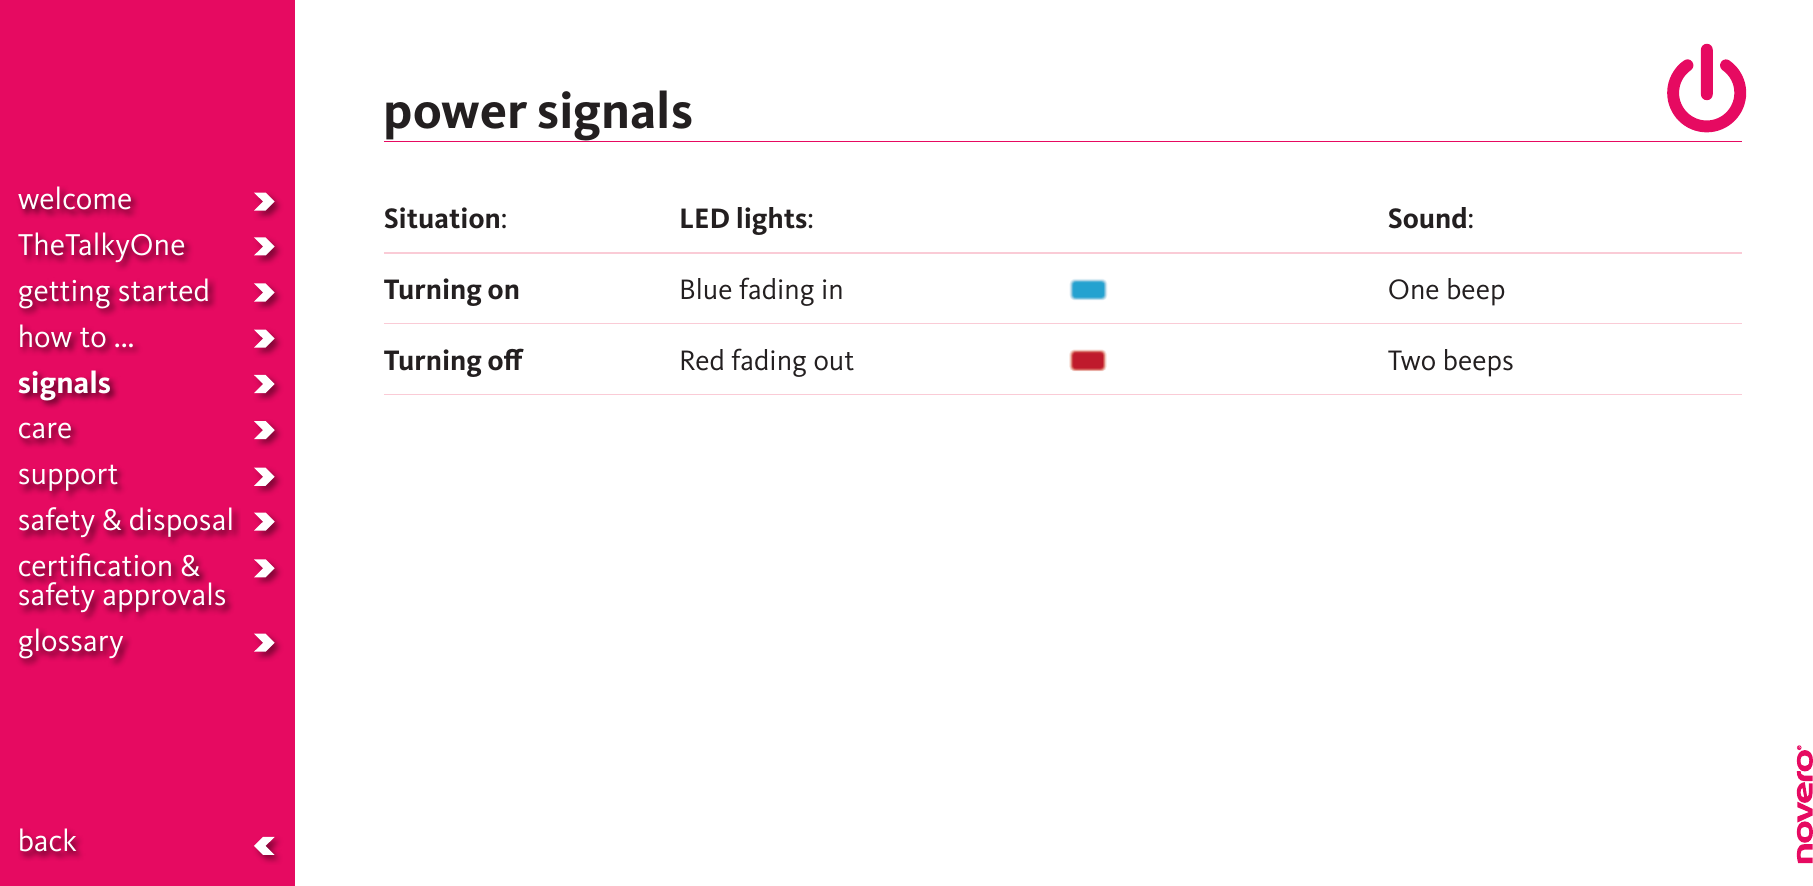 Situation: Turning on Turning oLED lights:Blue fading inRed fading outSound: One beepTwo beepspower signalswelcomeTheTalkyOnegetting startedhow to ...signalscaresupportsafety &amp; disposalcertiﬁcation &amp;  safety approvals glossary  back